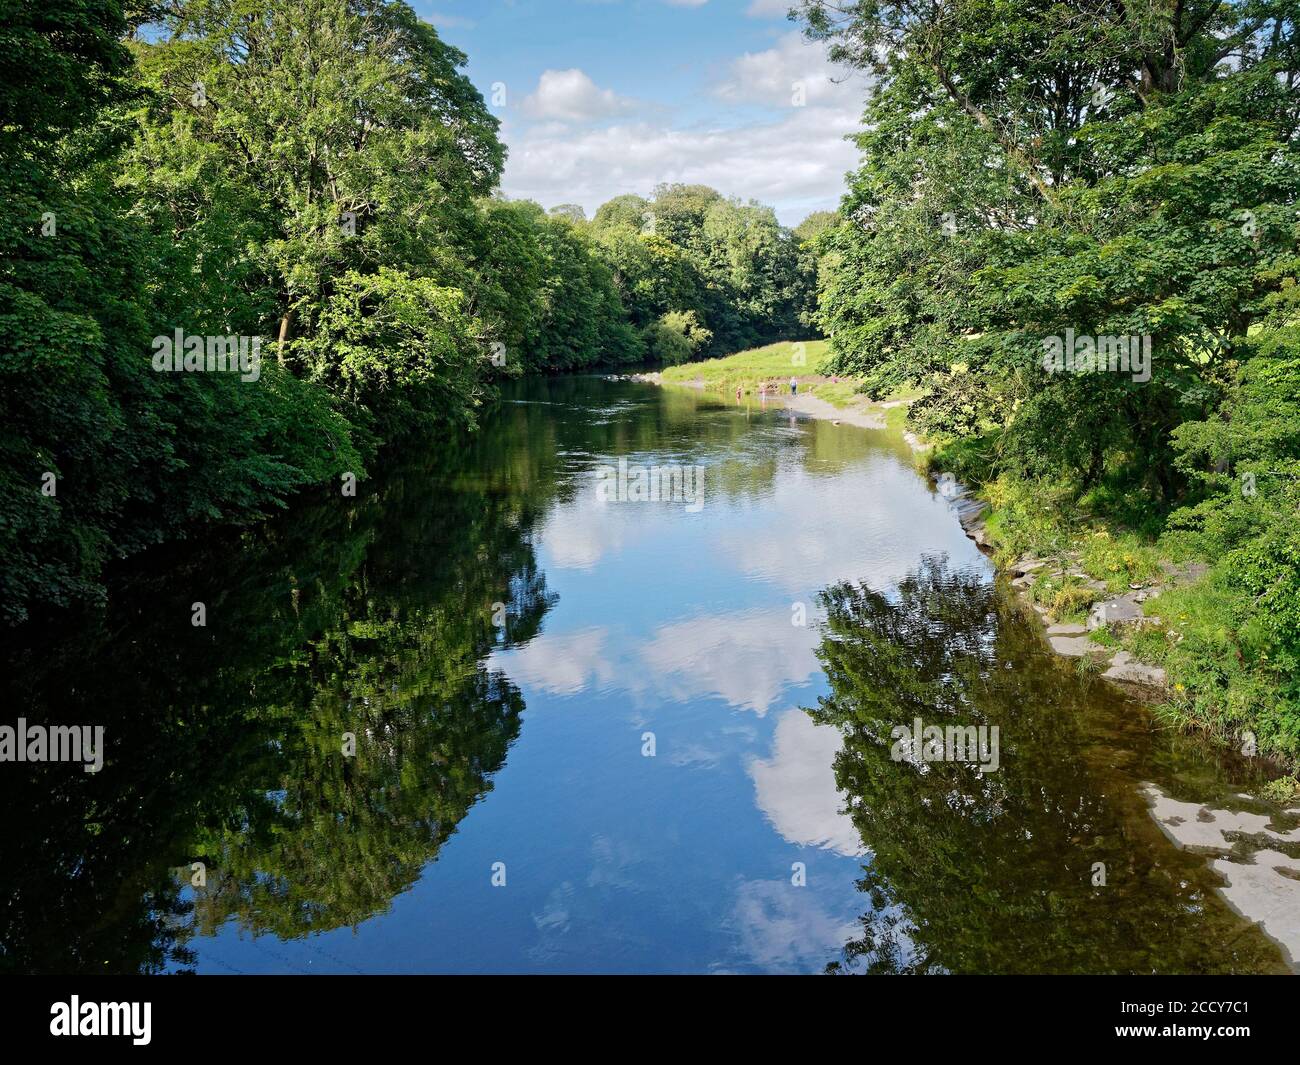 Scene on the River Kent at Wilson's Place near Sedgewick, Cumbria on a tranquil summer day. A salmon river and a site of special scientific interest. Stock Photo